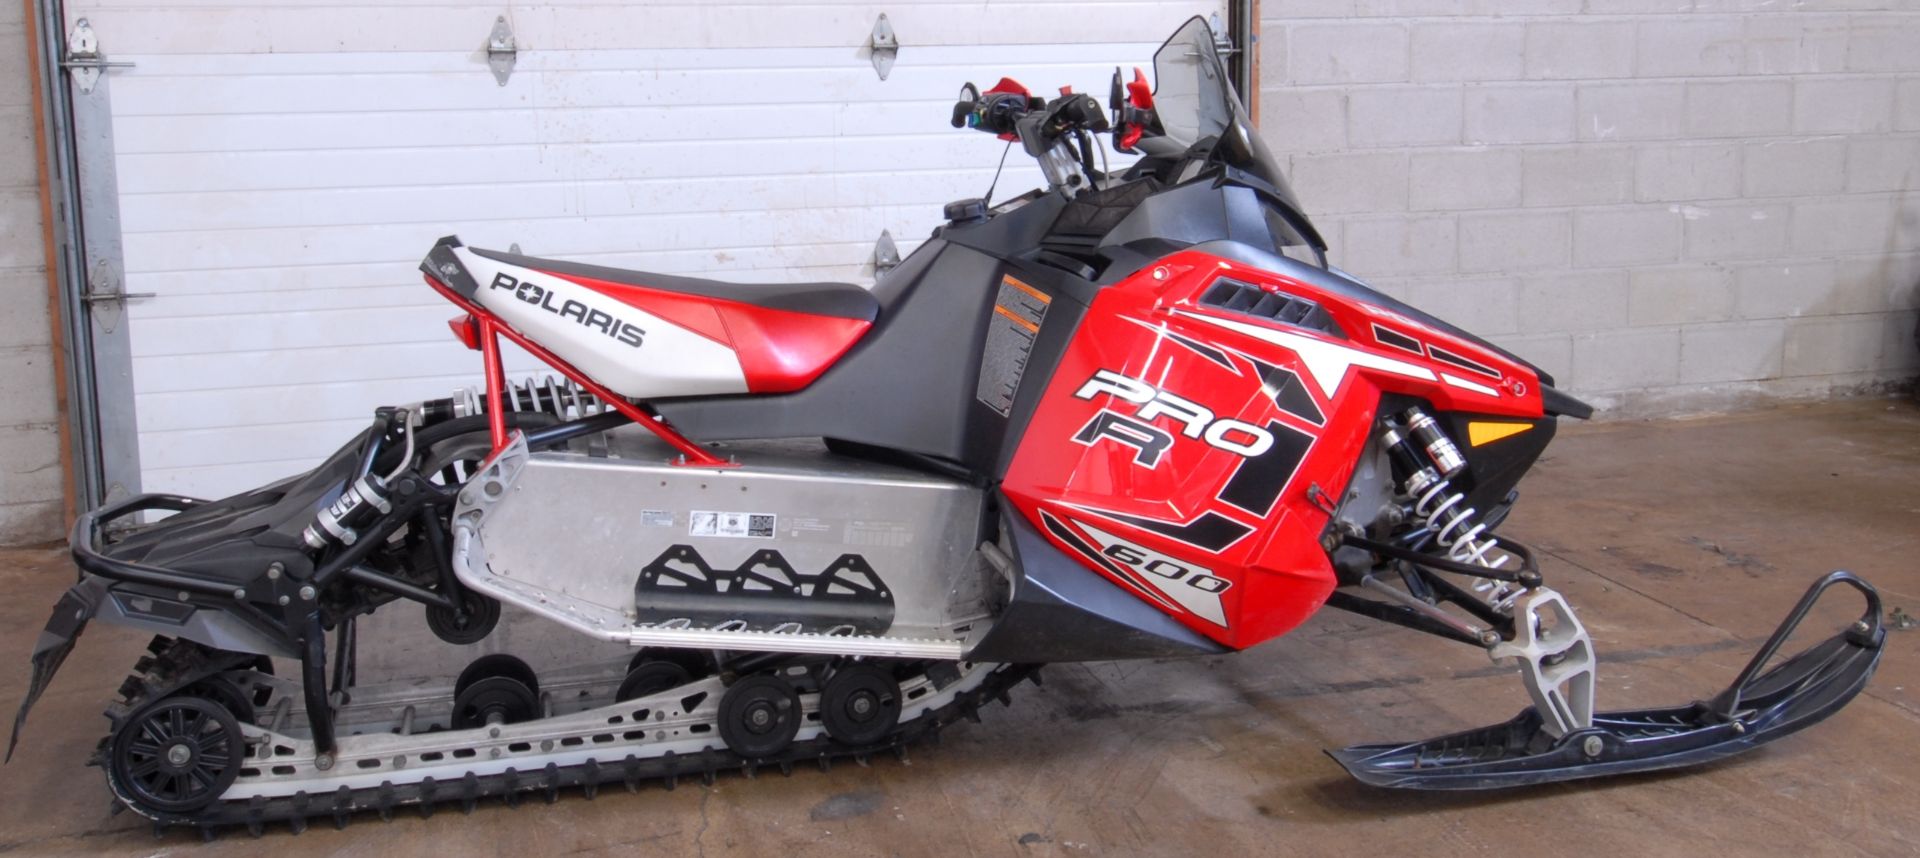 POLARIS (2012) PRO R600 SWITCH BACK SNOWMOBILE WITH R600 ENGINE - Image 2 of 2